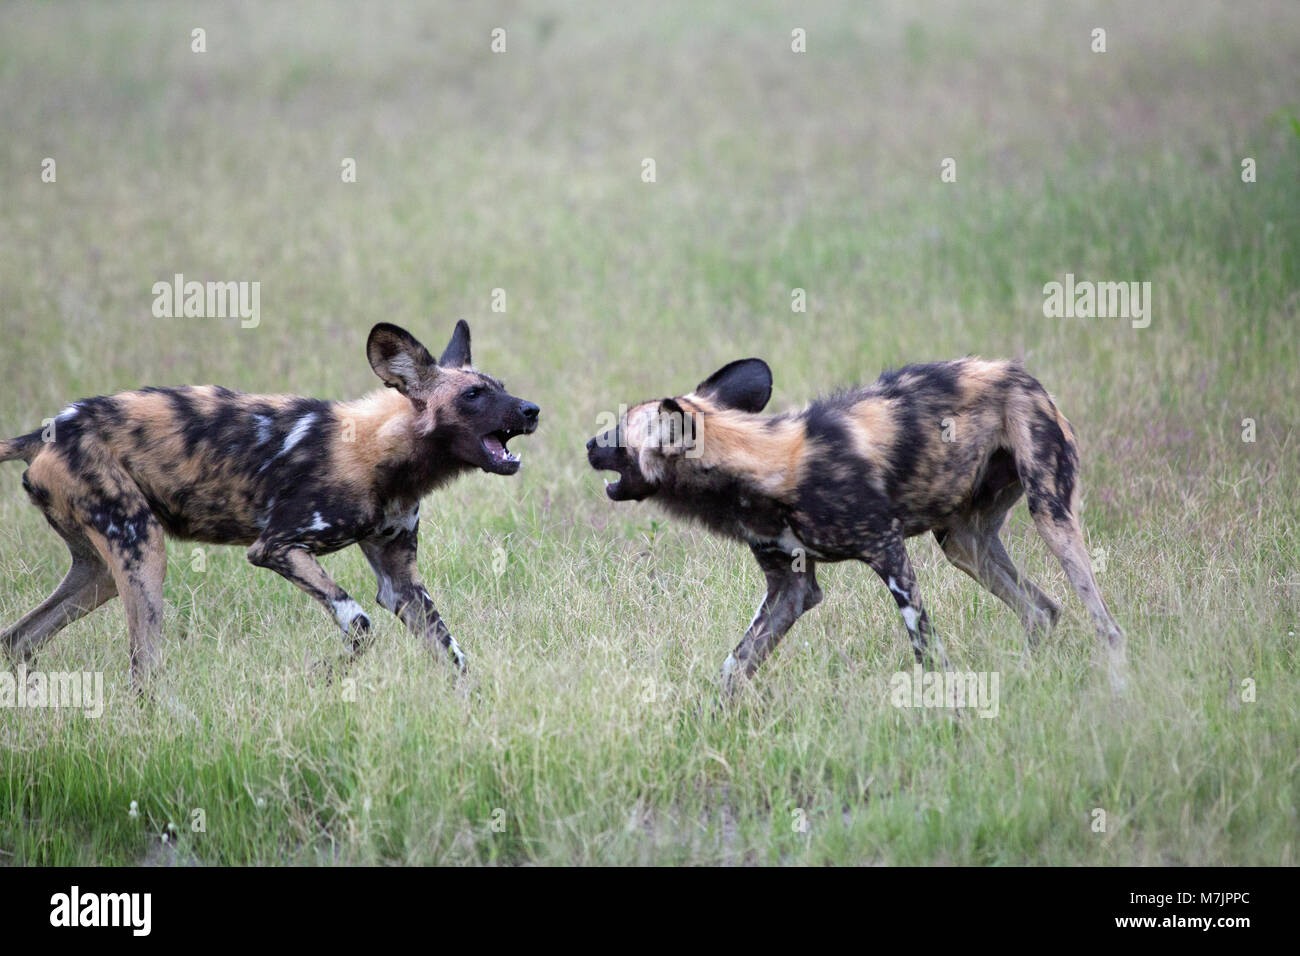 African Hunting Dog, African Wild Dog, or Painted Dog (Lycaon pictus). Okavango Delta. Botswana. Africa. Dispute. Stock Photo